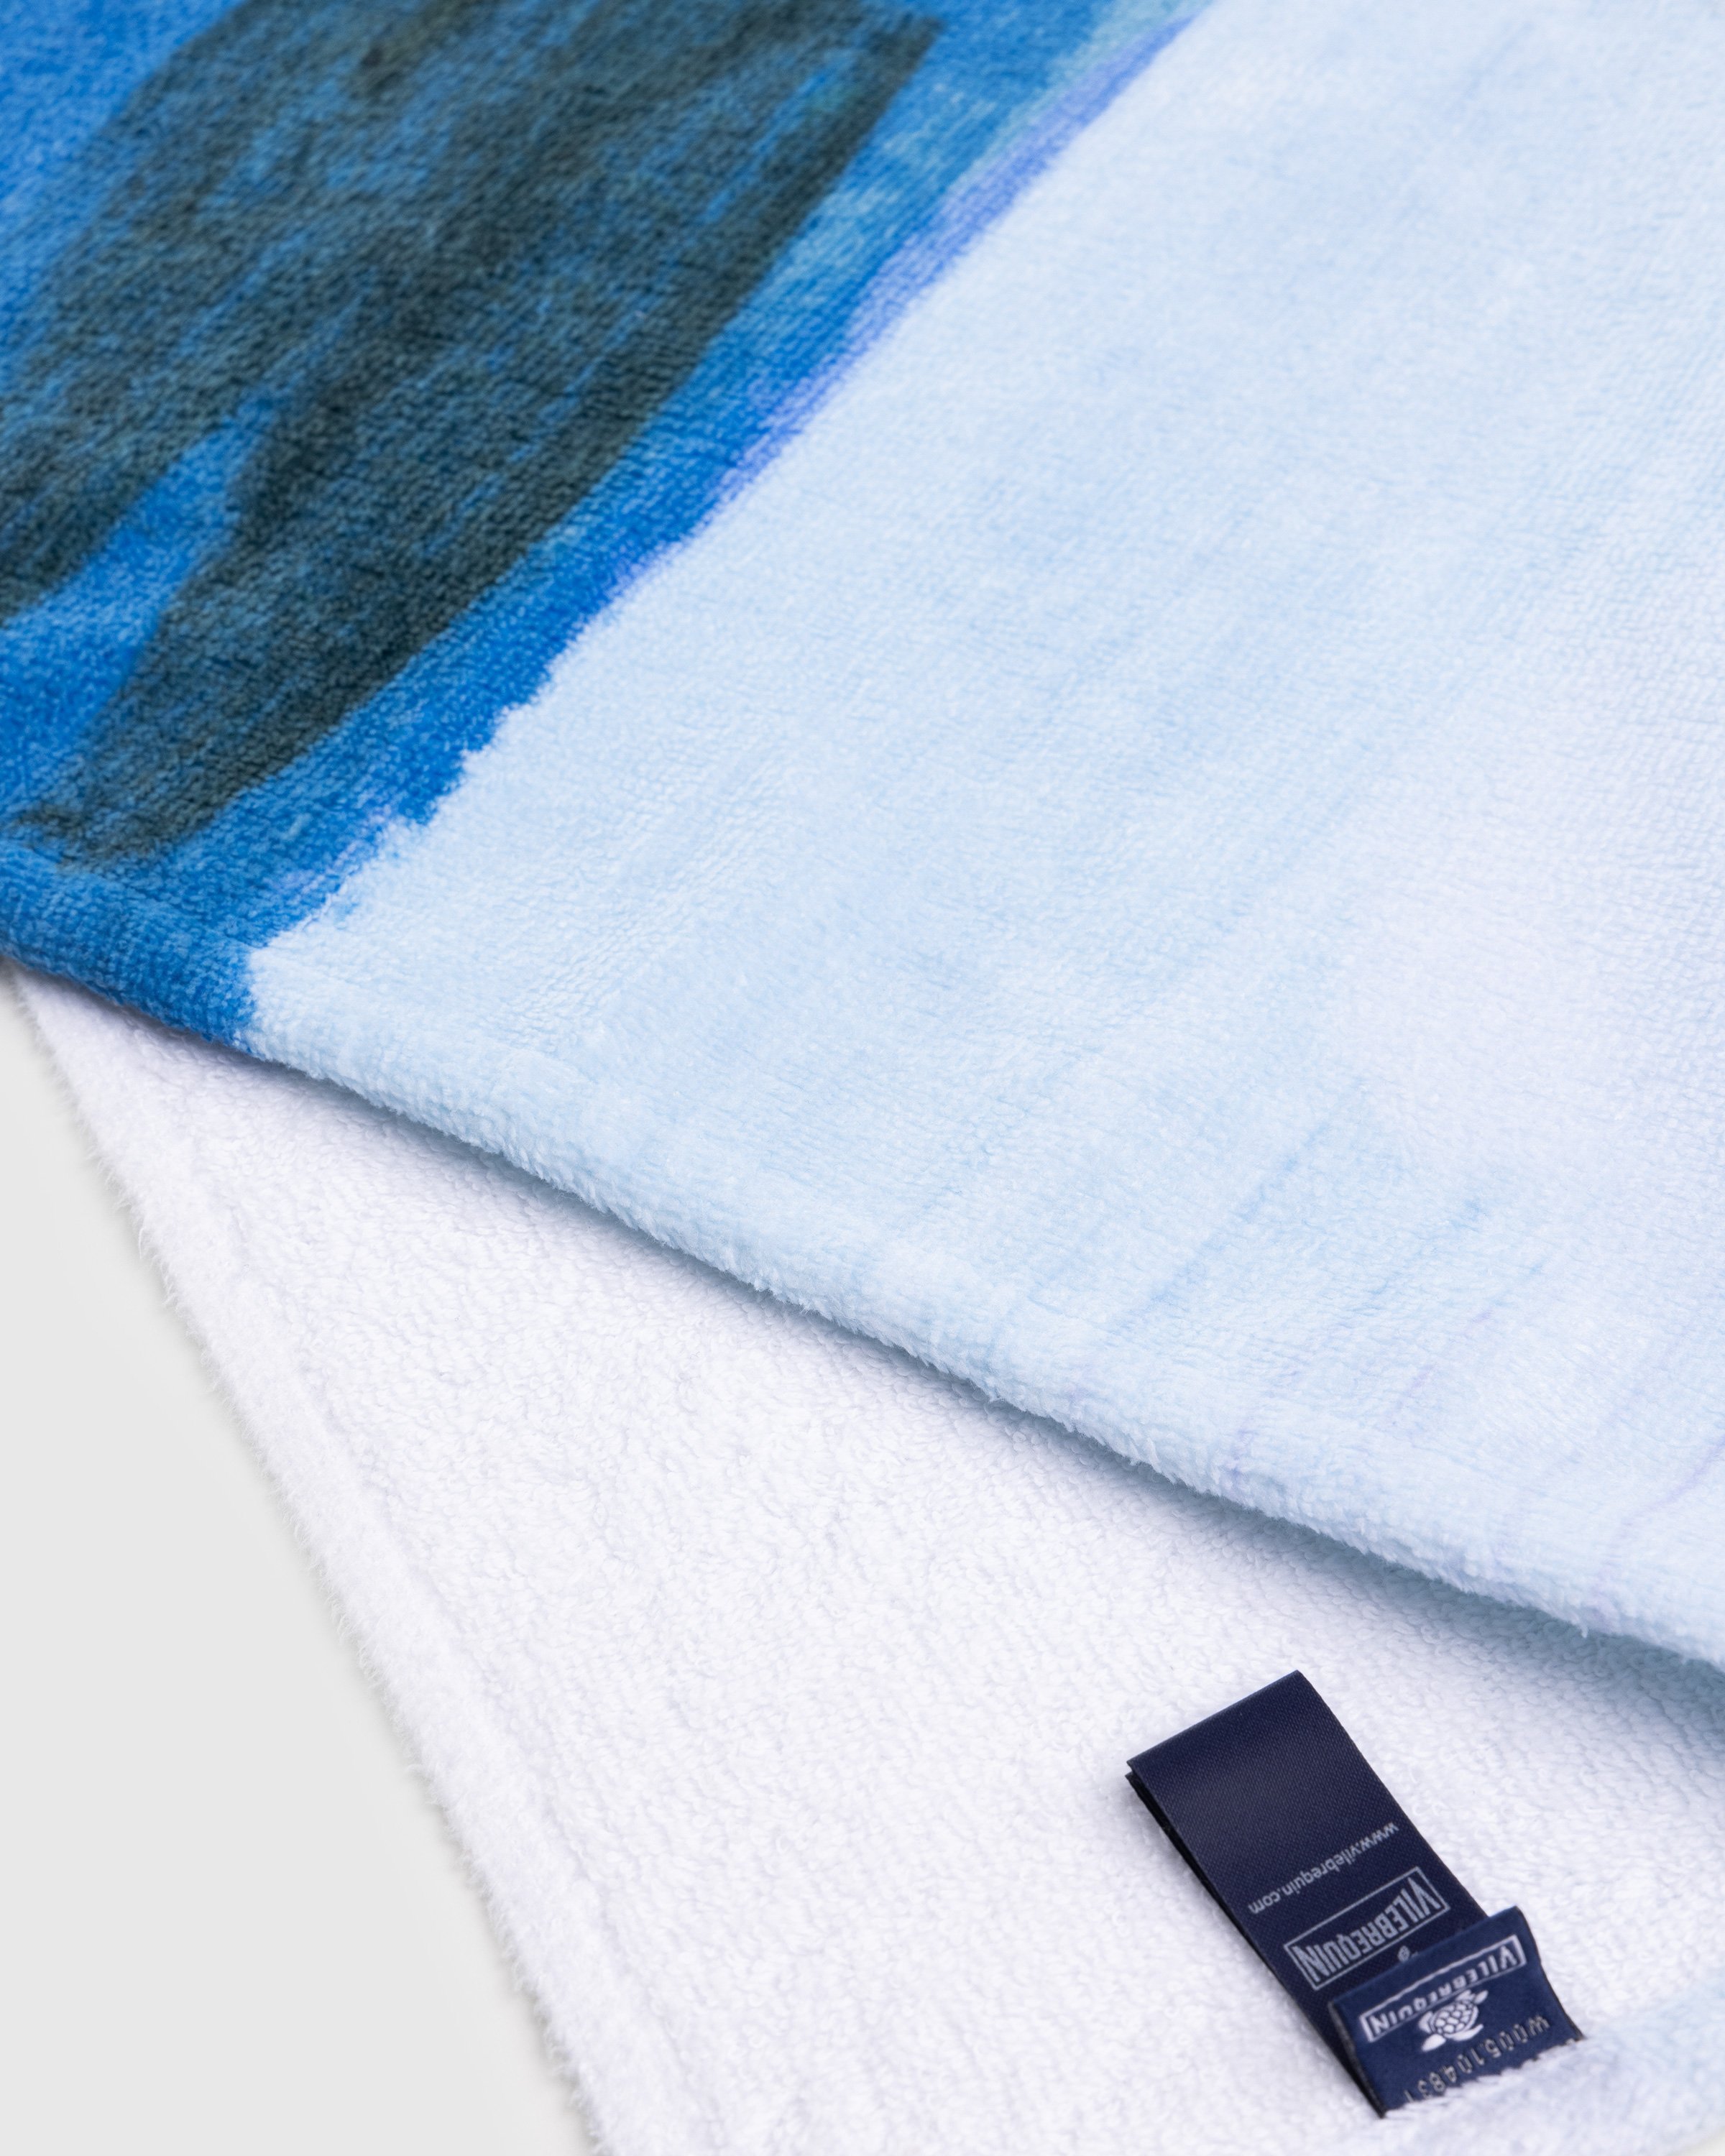 Vilebrequin x Highsnobiety - Printed Towel Chambray - Lifestyle - Blue - Image 3